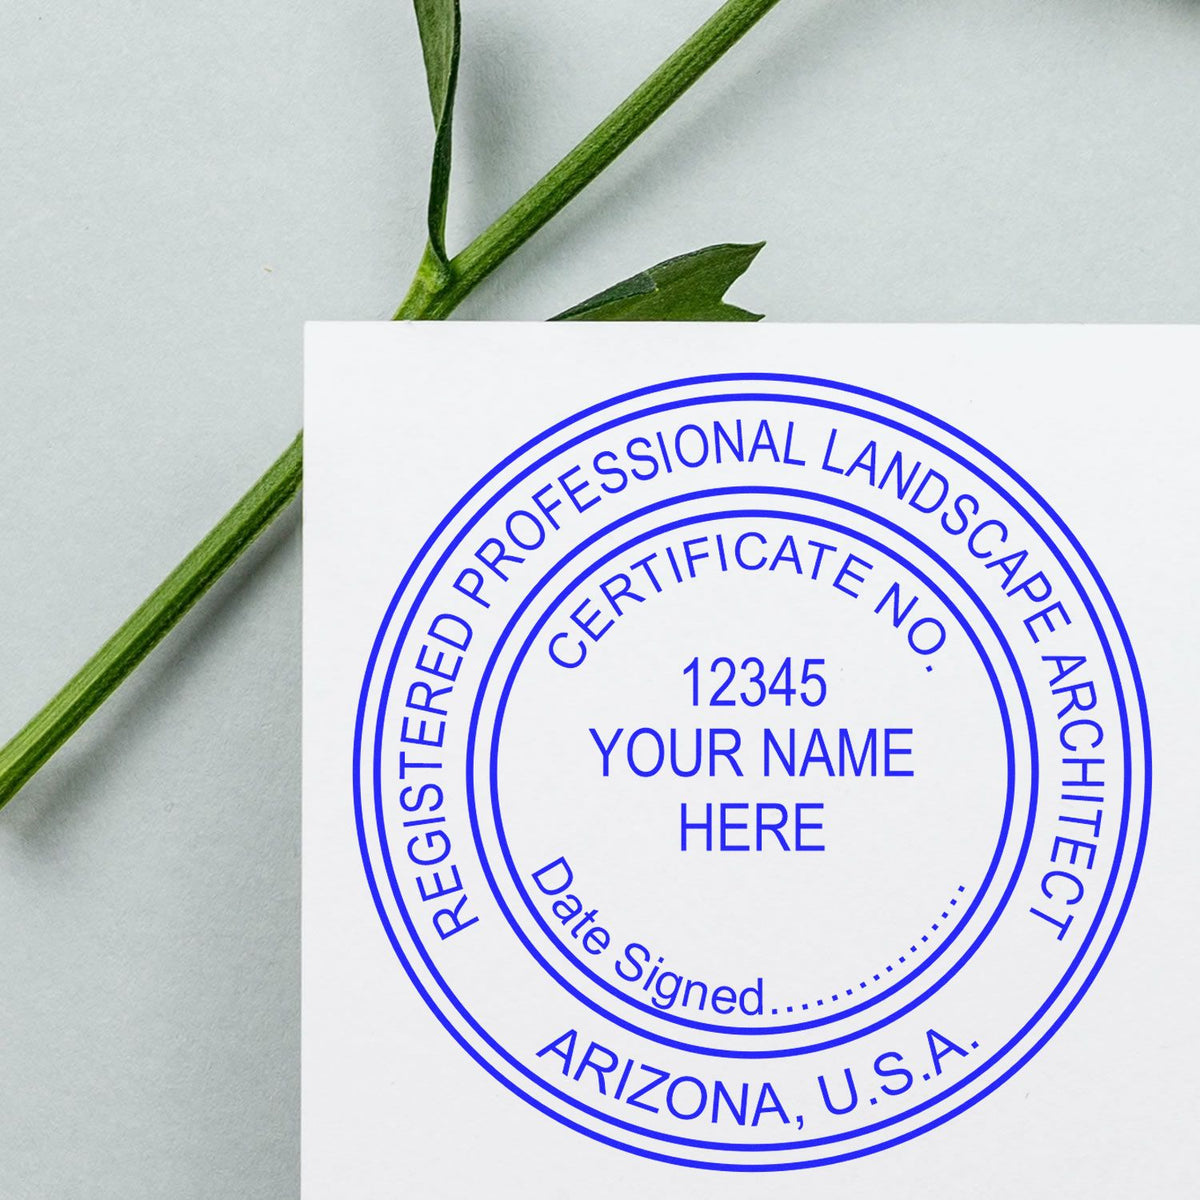 This paper is stamped with a sample imprint of the Self-Inking Arizona Landscape Architect Stamp, signifying its quality and reliability.